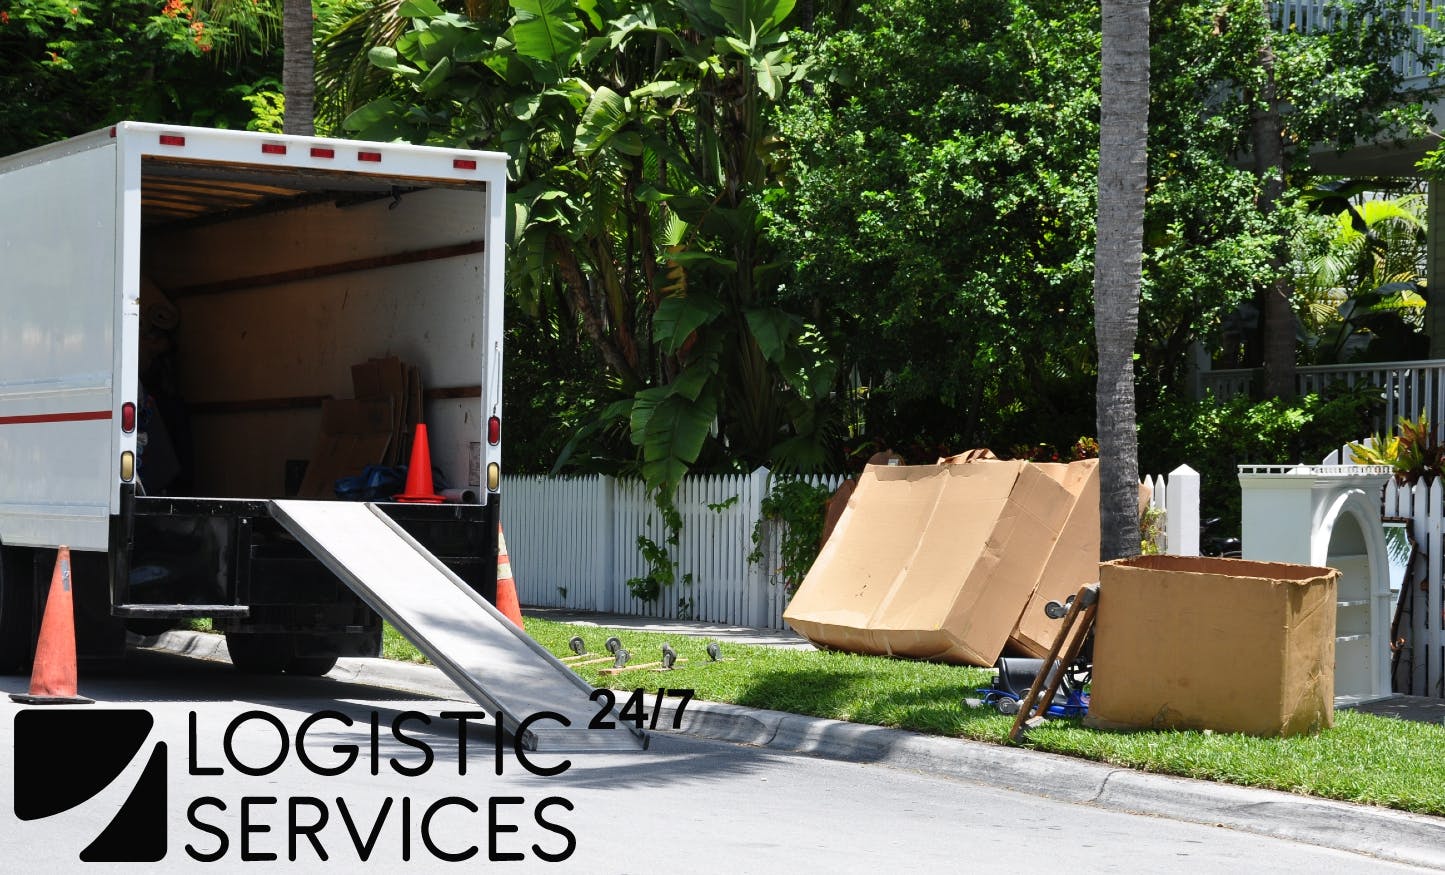 24/7 Logistic Services: Extensive Moving Services Review